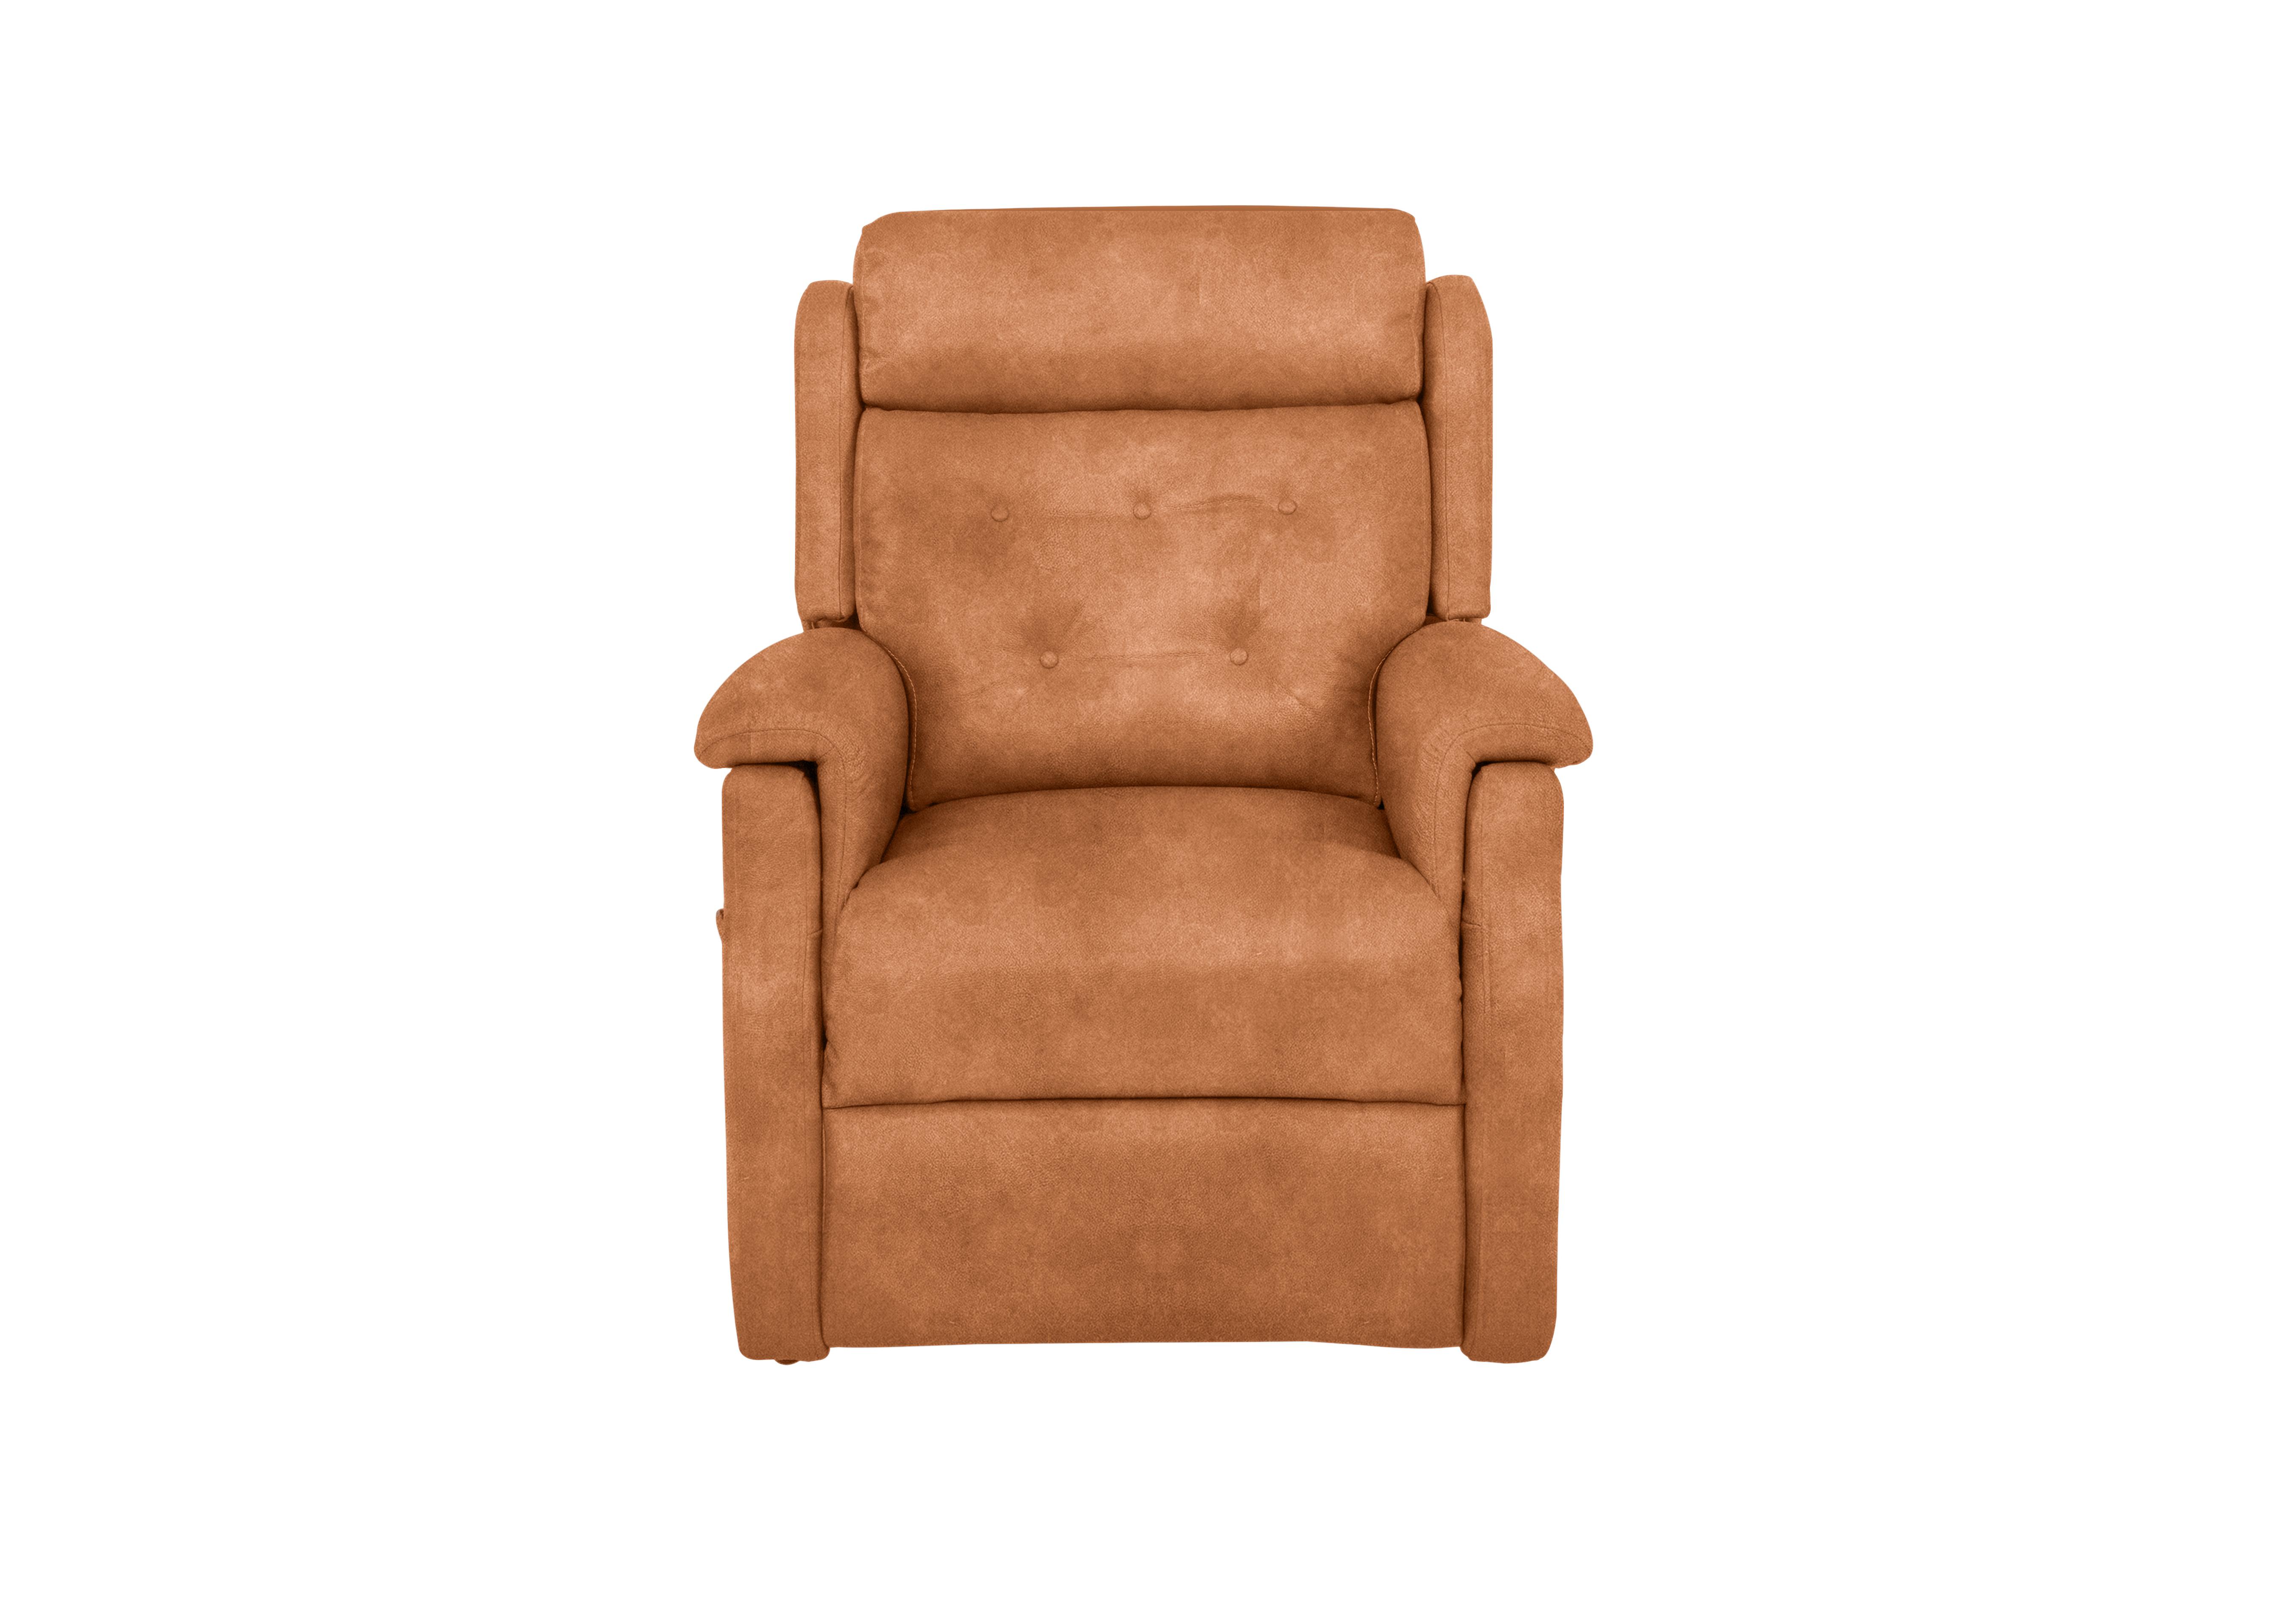 My Chair Scott Fabric Lift and Rise Chair in 43509 Pumpkin Dexter 09 on Furniture Village